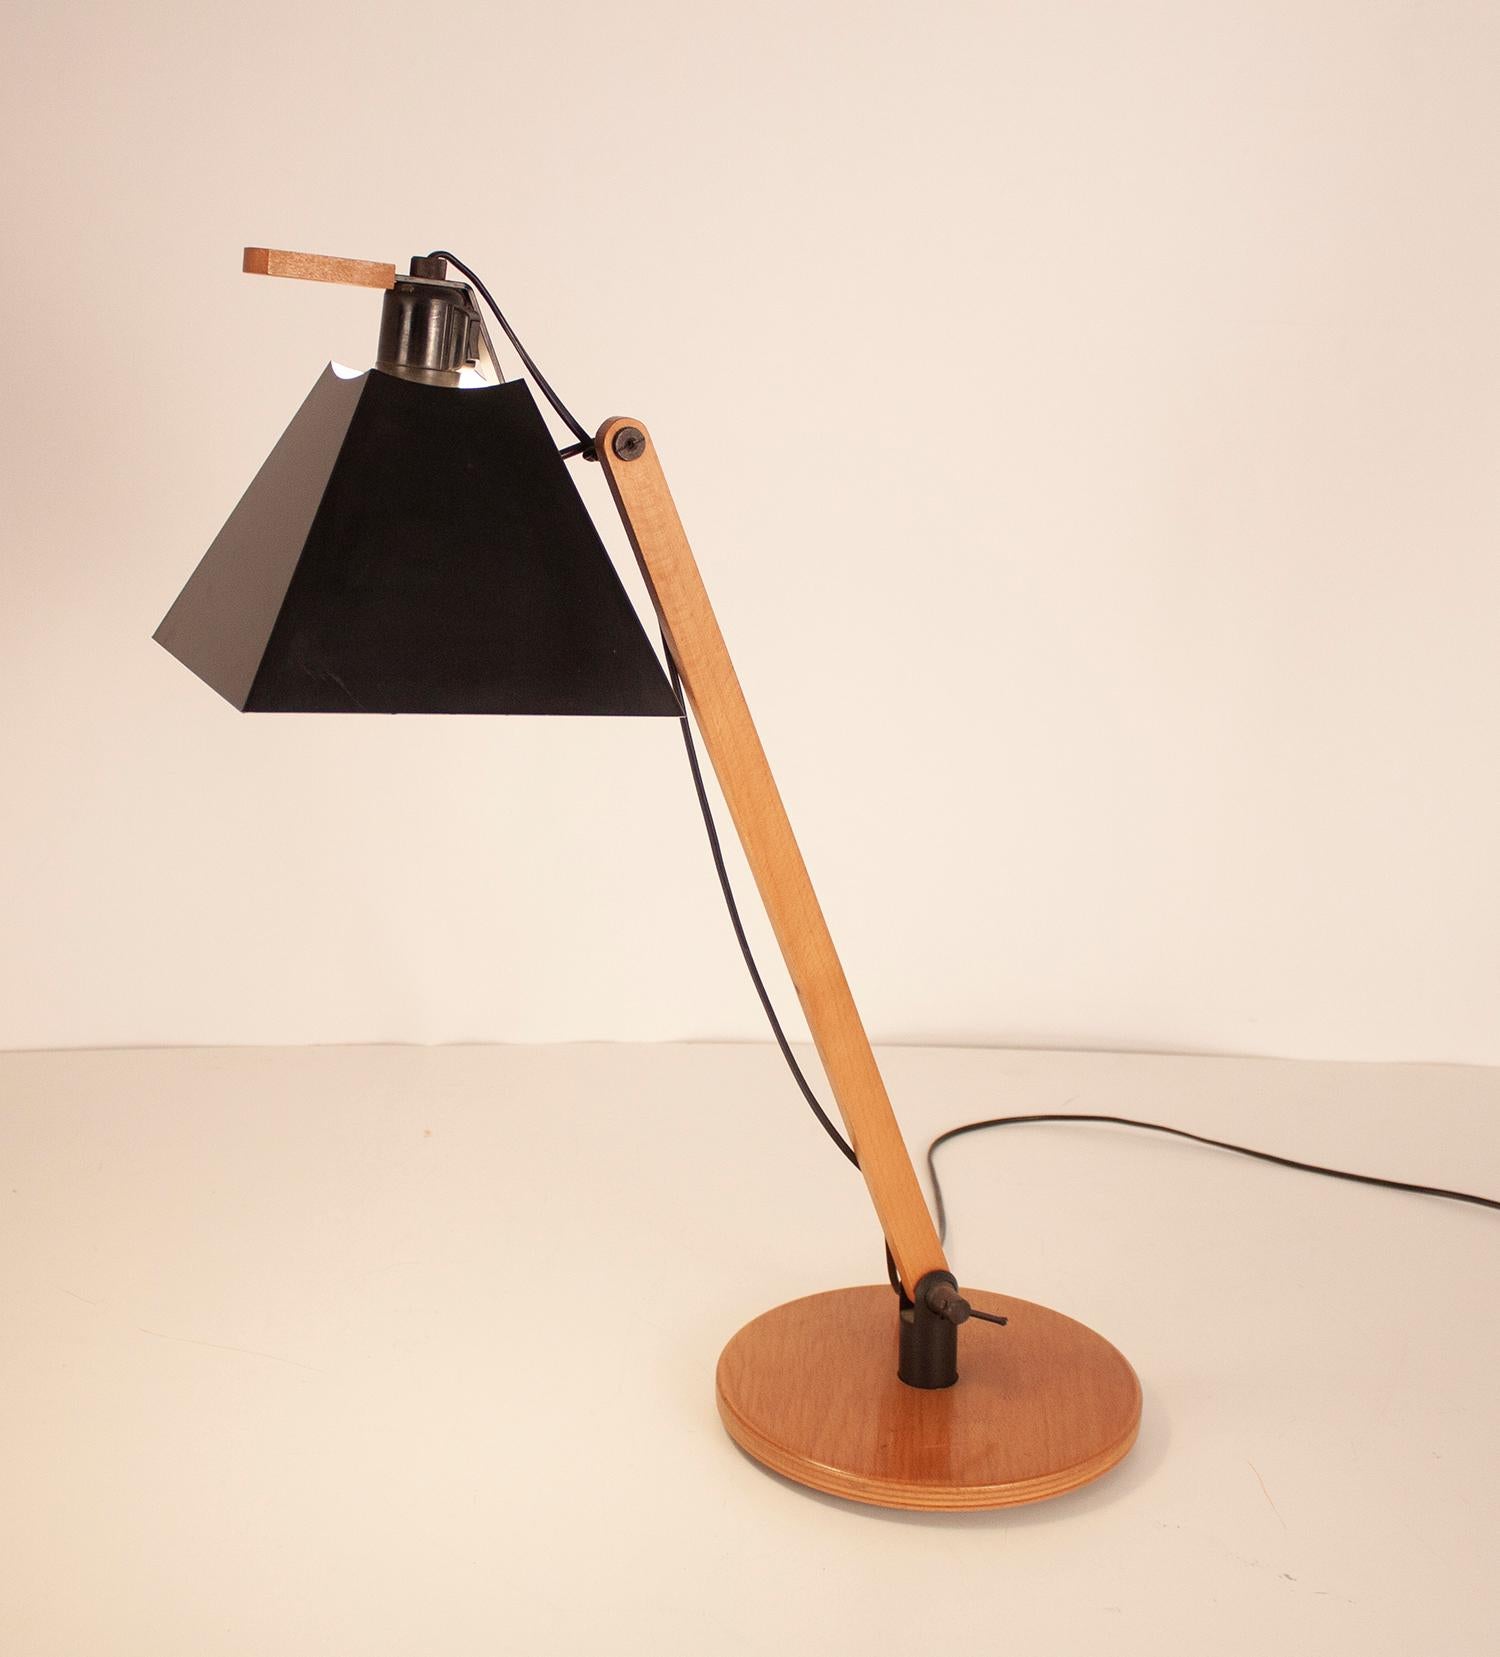 Late 20th Century  Vintage Arquímedes Desk Table Lamp by Gemma Bernal for Tramo, 1970's For Sale